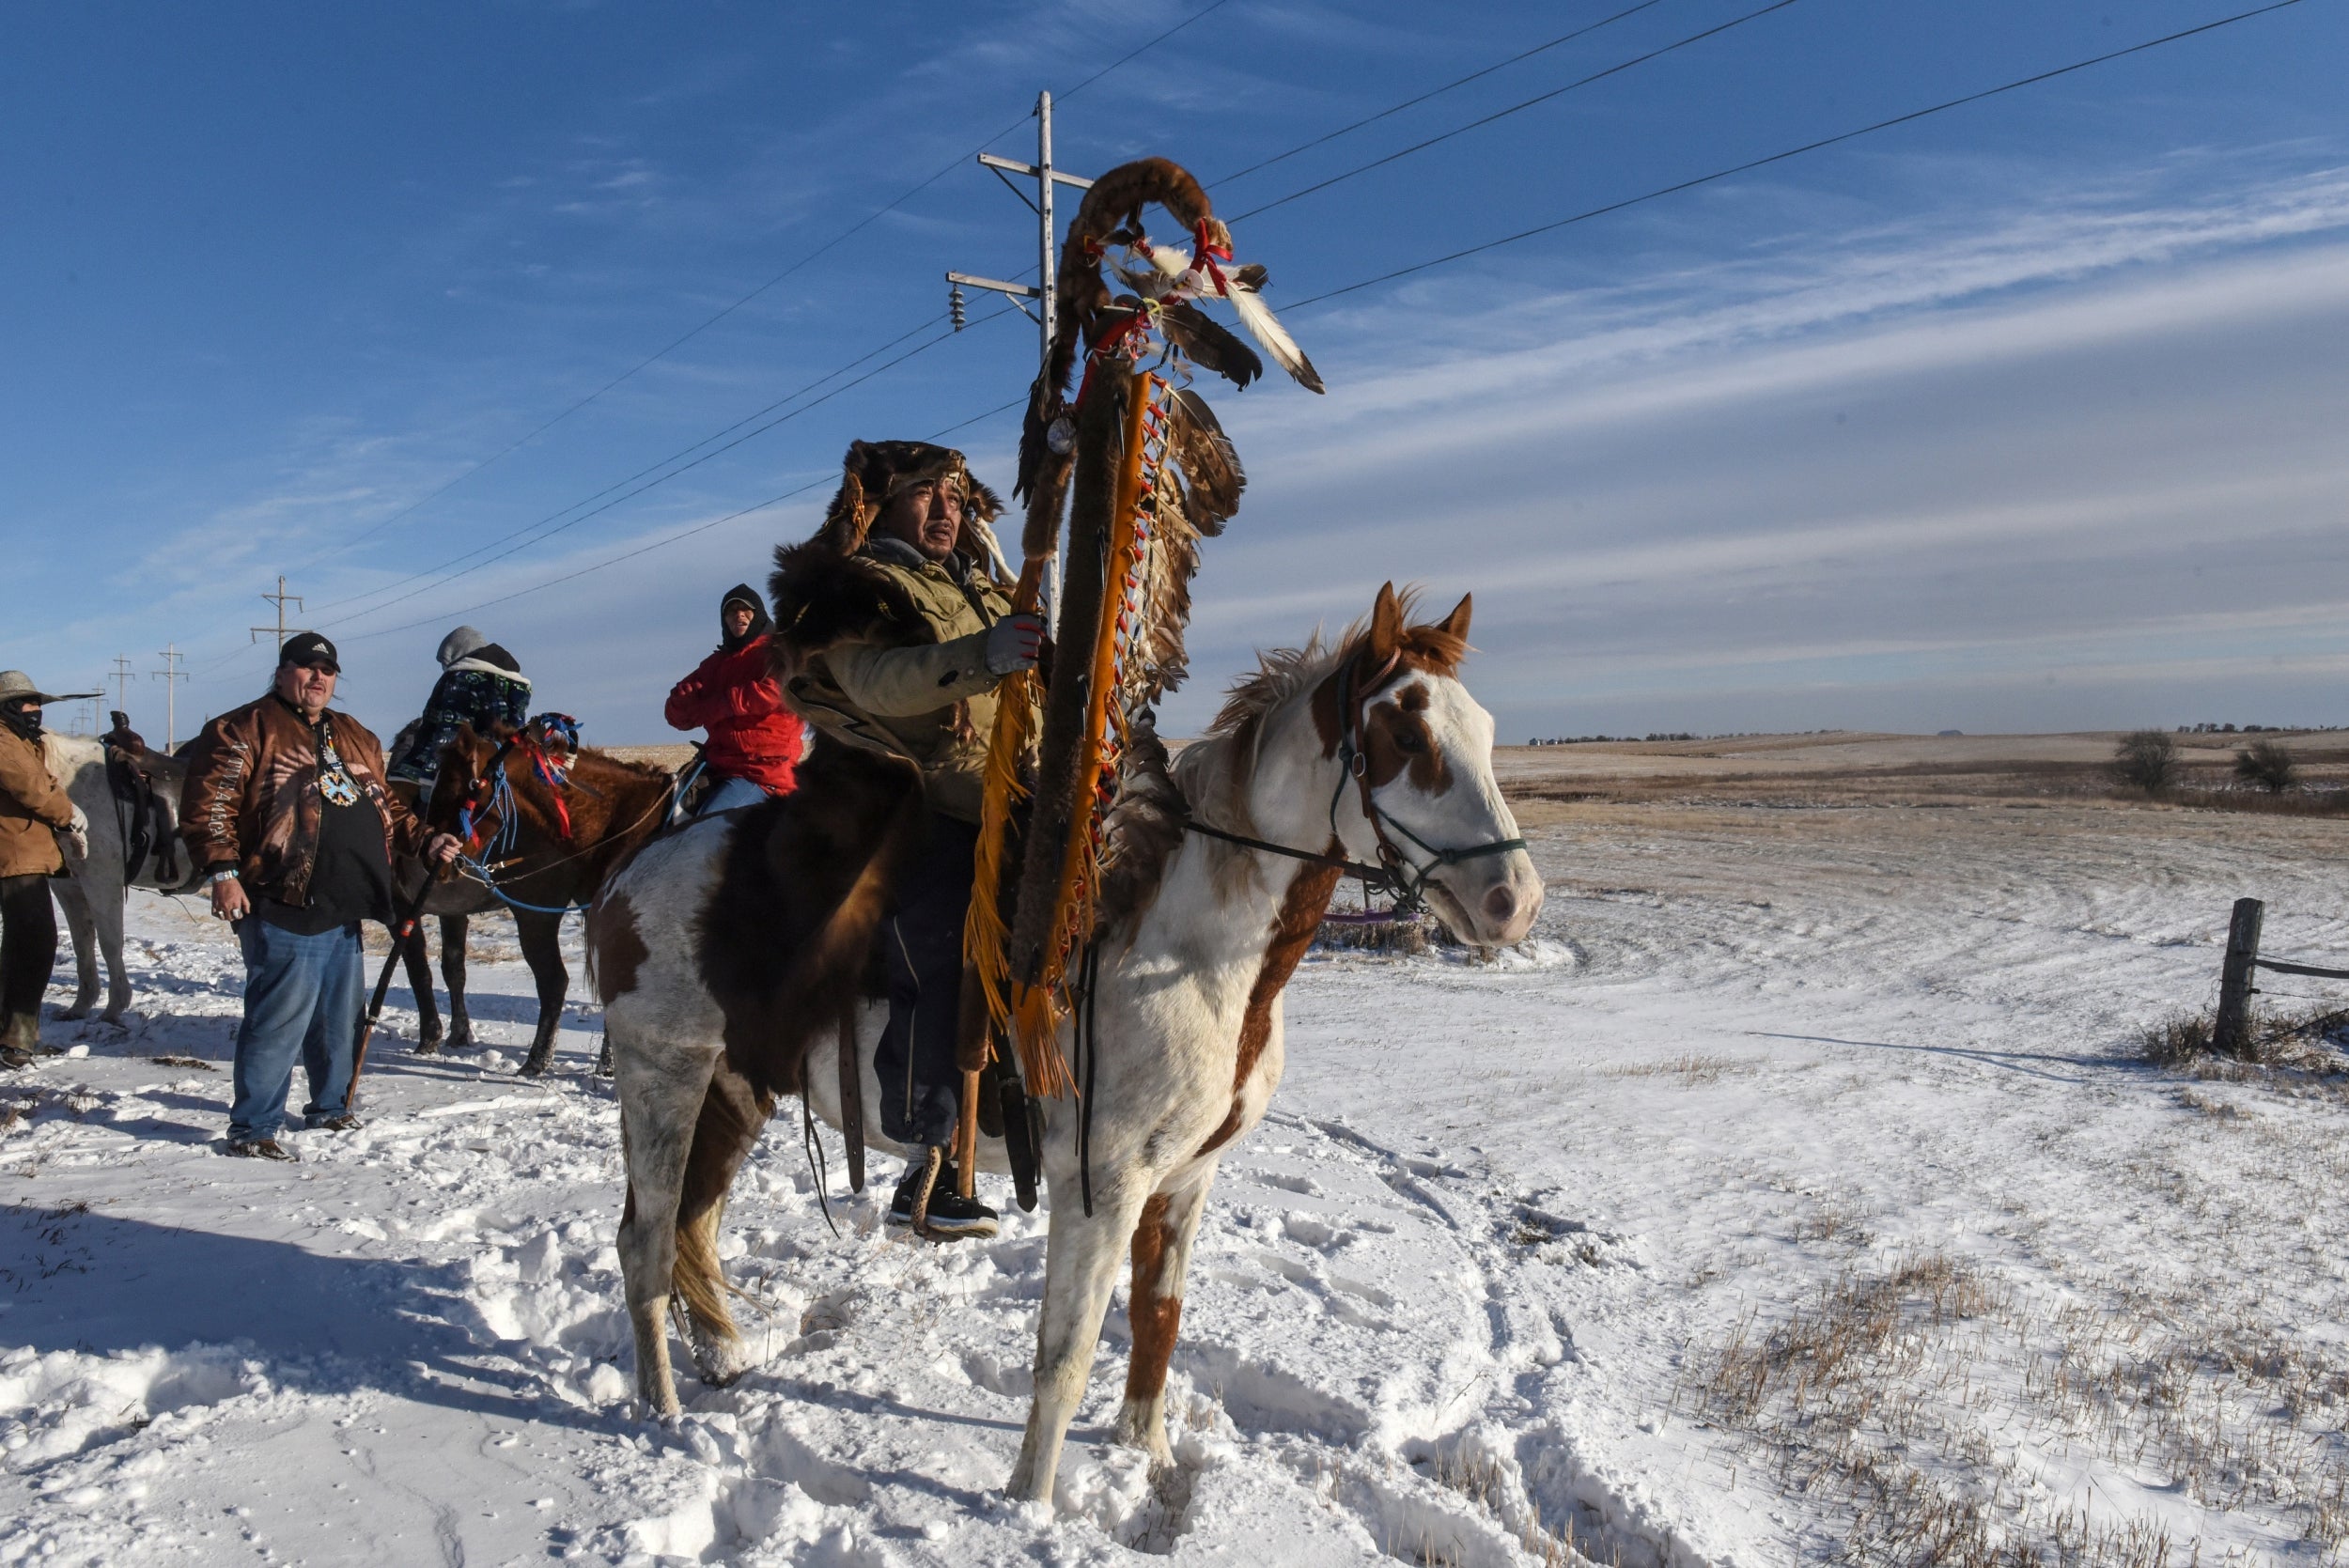 A Lakota member with a sacred staff rides to meet a descendant of the commander of the Wounded Knee massacre